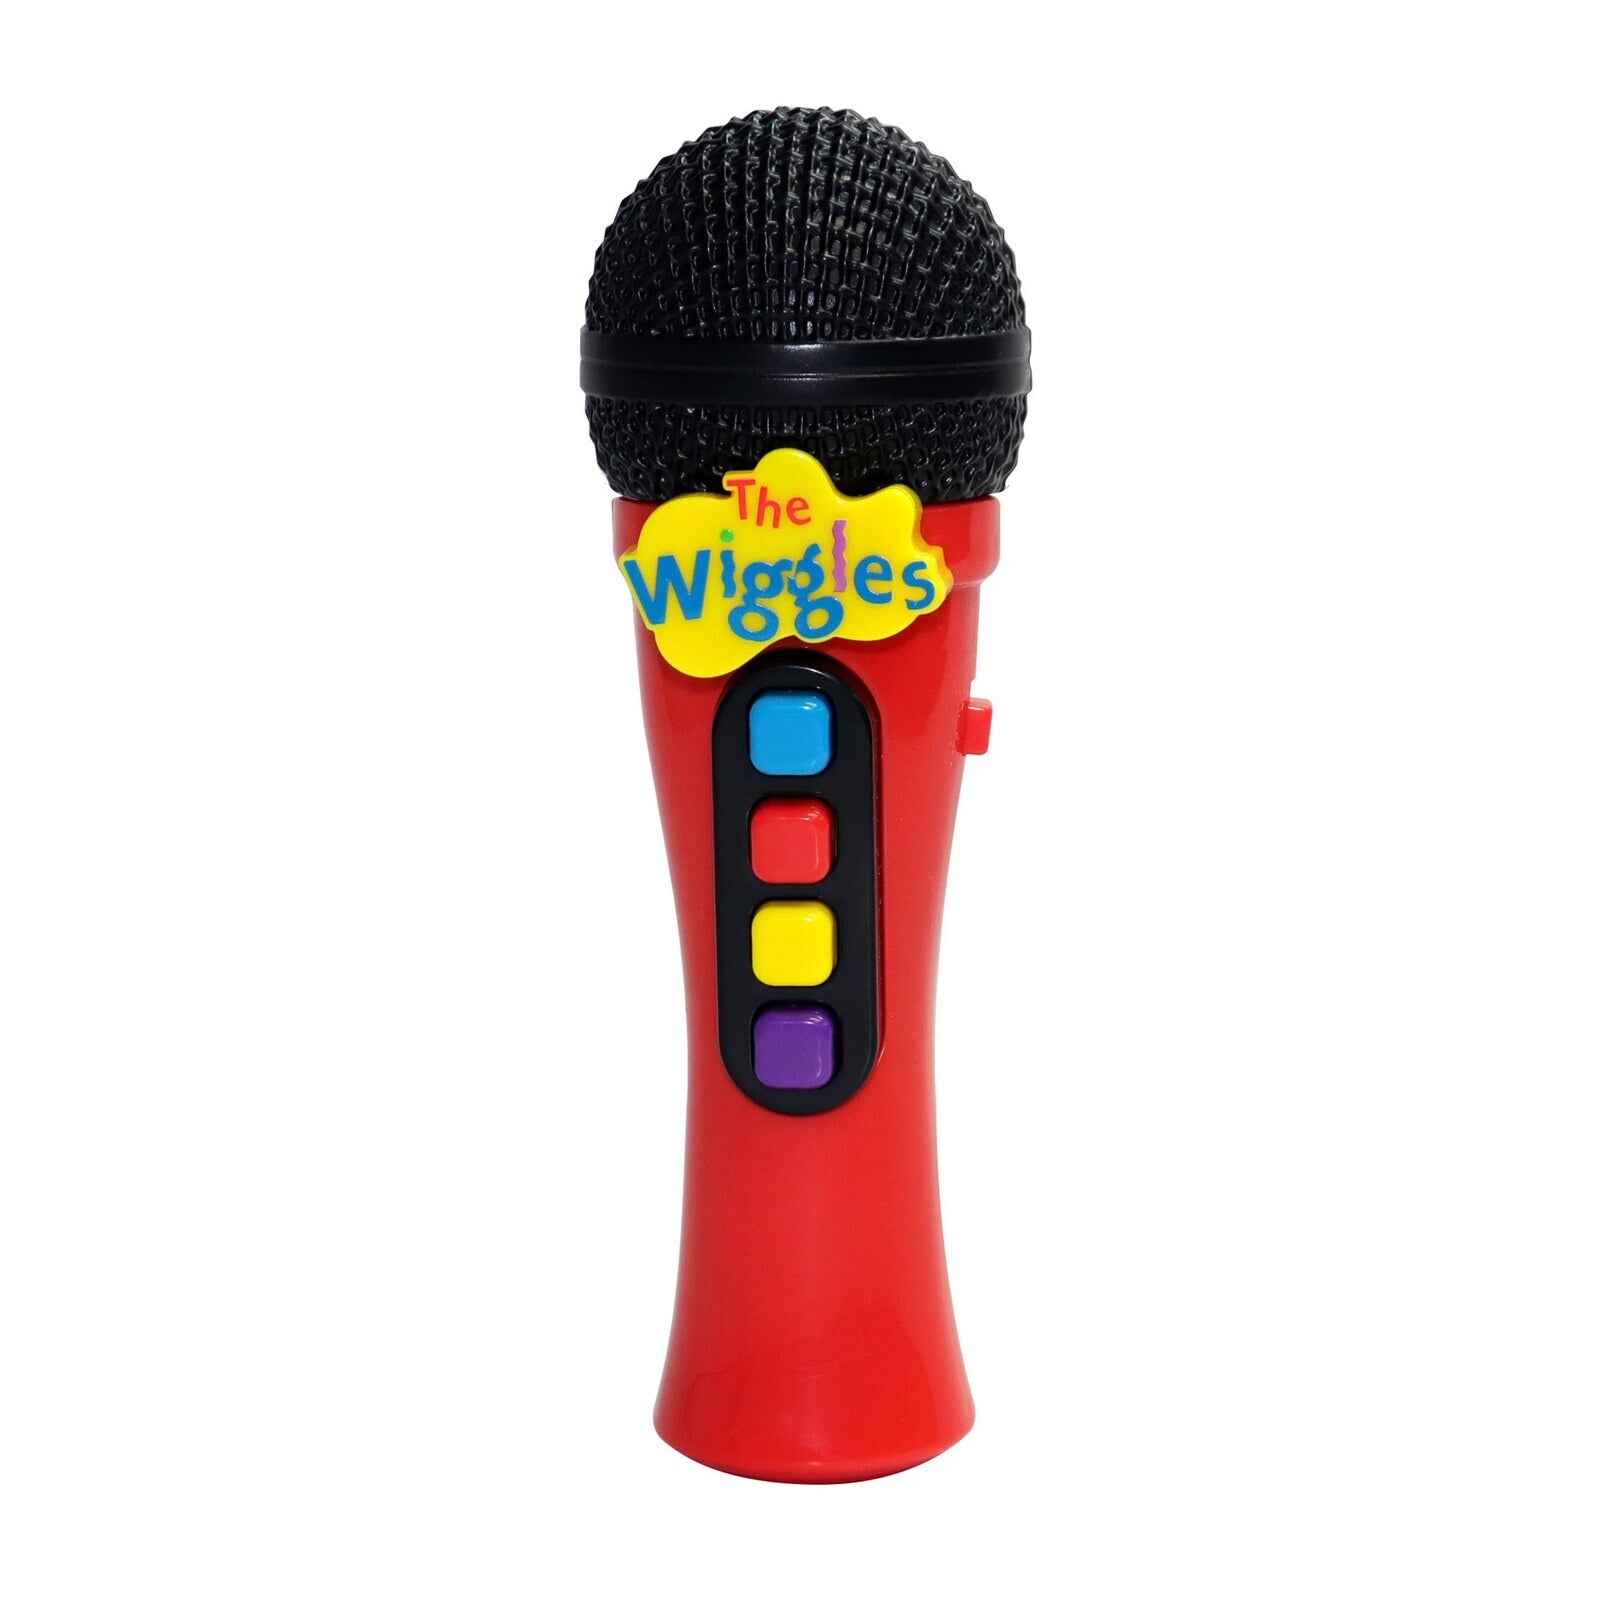 The Wiggles - Sing Along Microphone